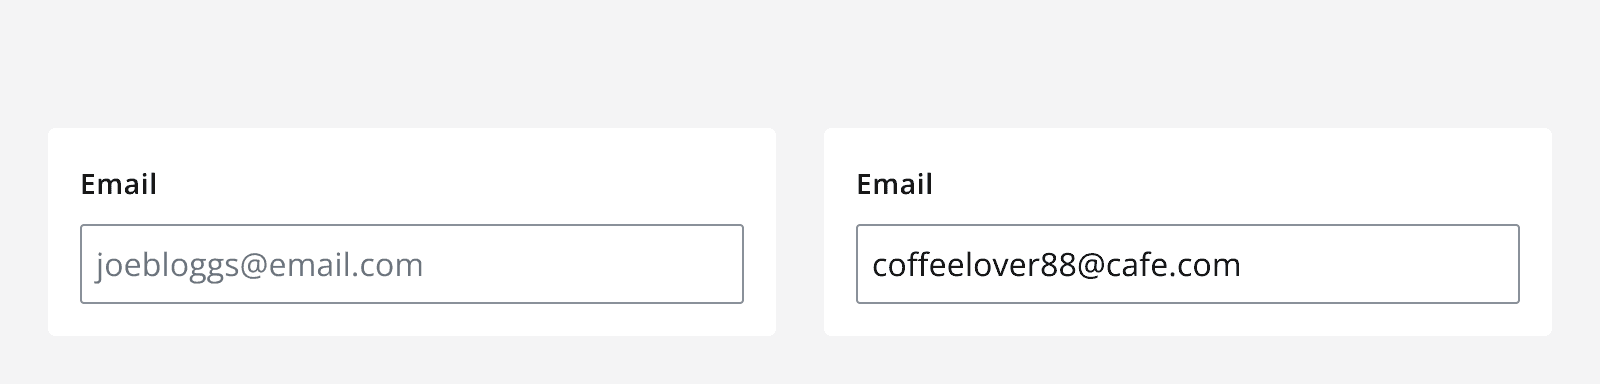 An image showing two text fields, both with a label which states 'Email'. One shows a placeholder email in the input box, while the other shows a filled in input box with an actual email address.